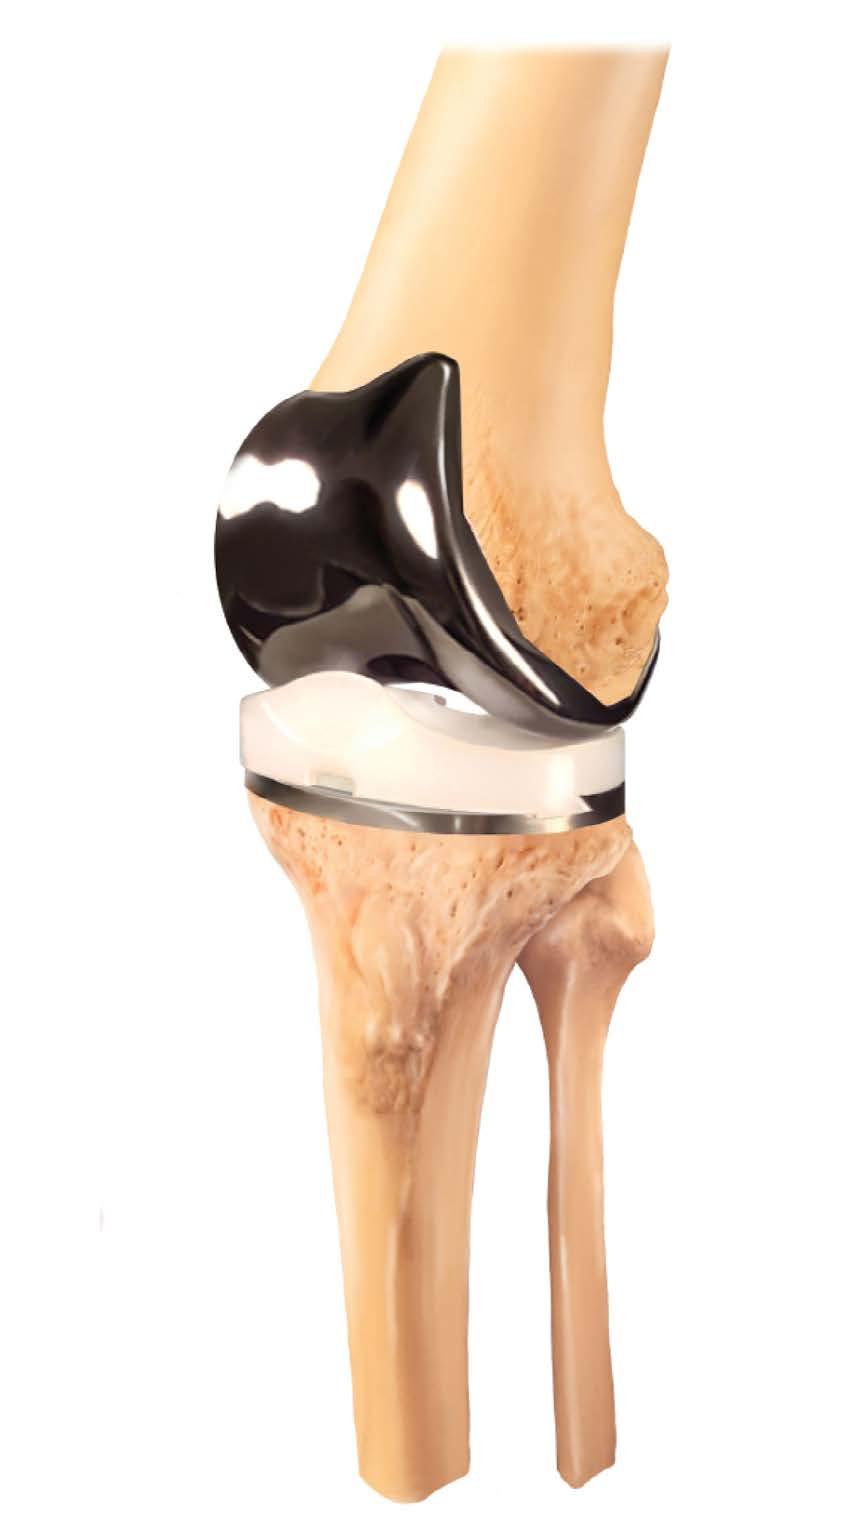 Your surgeon may elect to resurface the patella (kneecap) with a plastic prosthesis. The prosthesis will be held in place with cement.